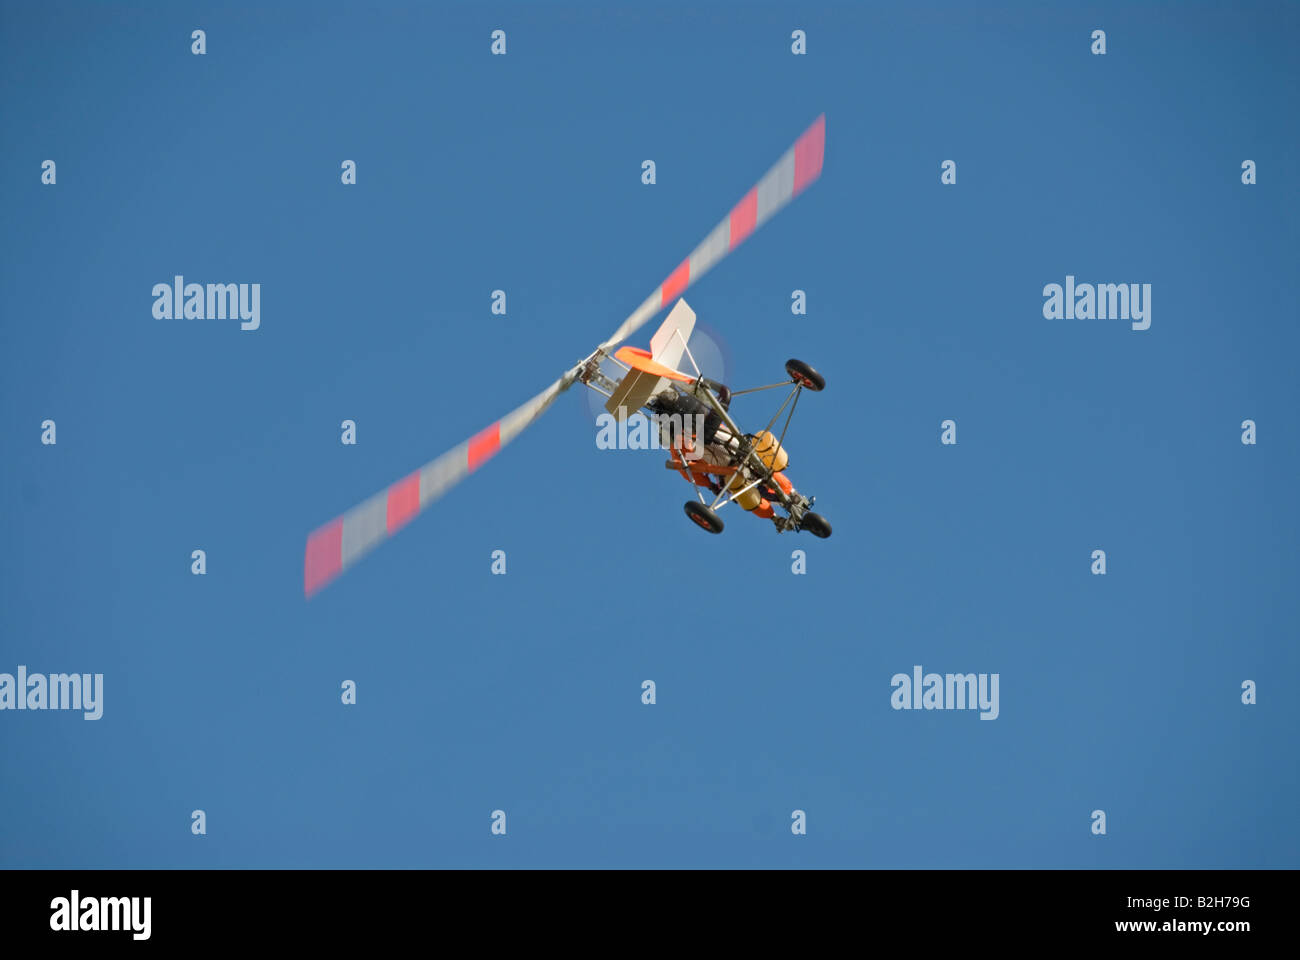 Stock photo of a single autogyro flying against a blue sky The photo was taken during a aviation dislplay in Estivol France Stock Photo